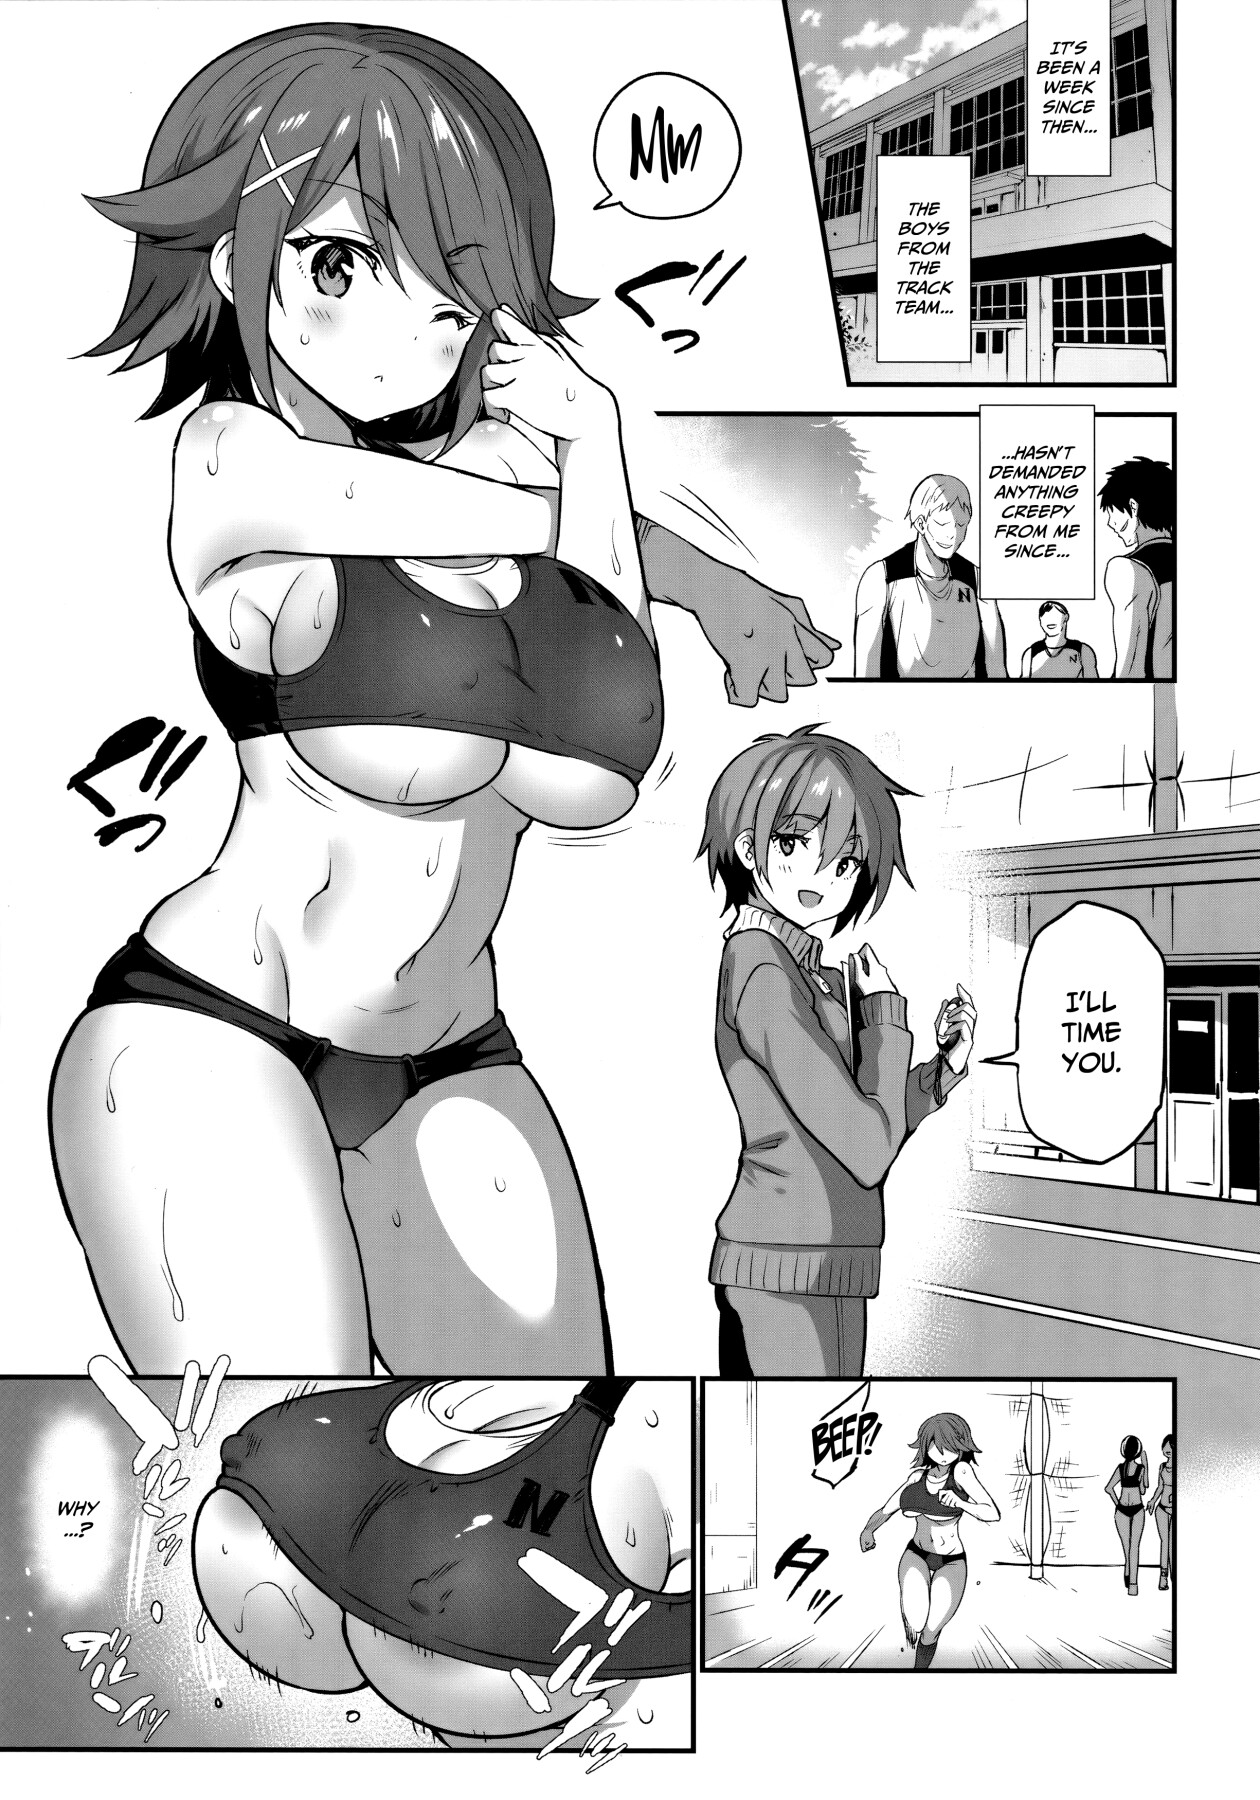 Hentai Manga Comic-School In The Spring of Youth 17-Read-2